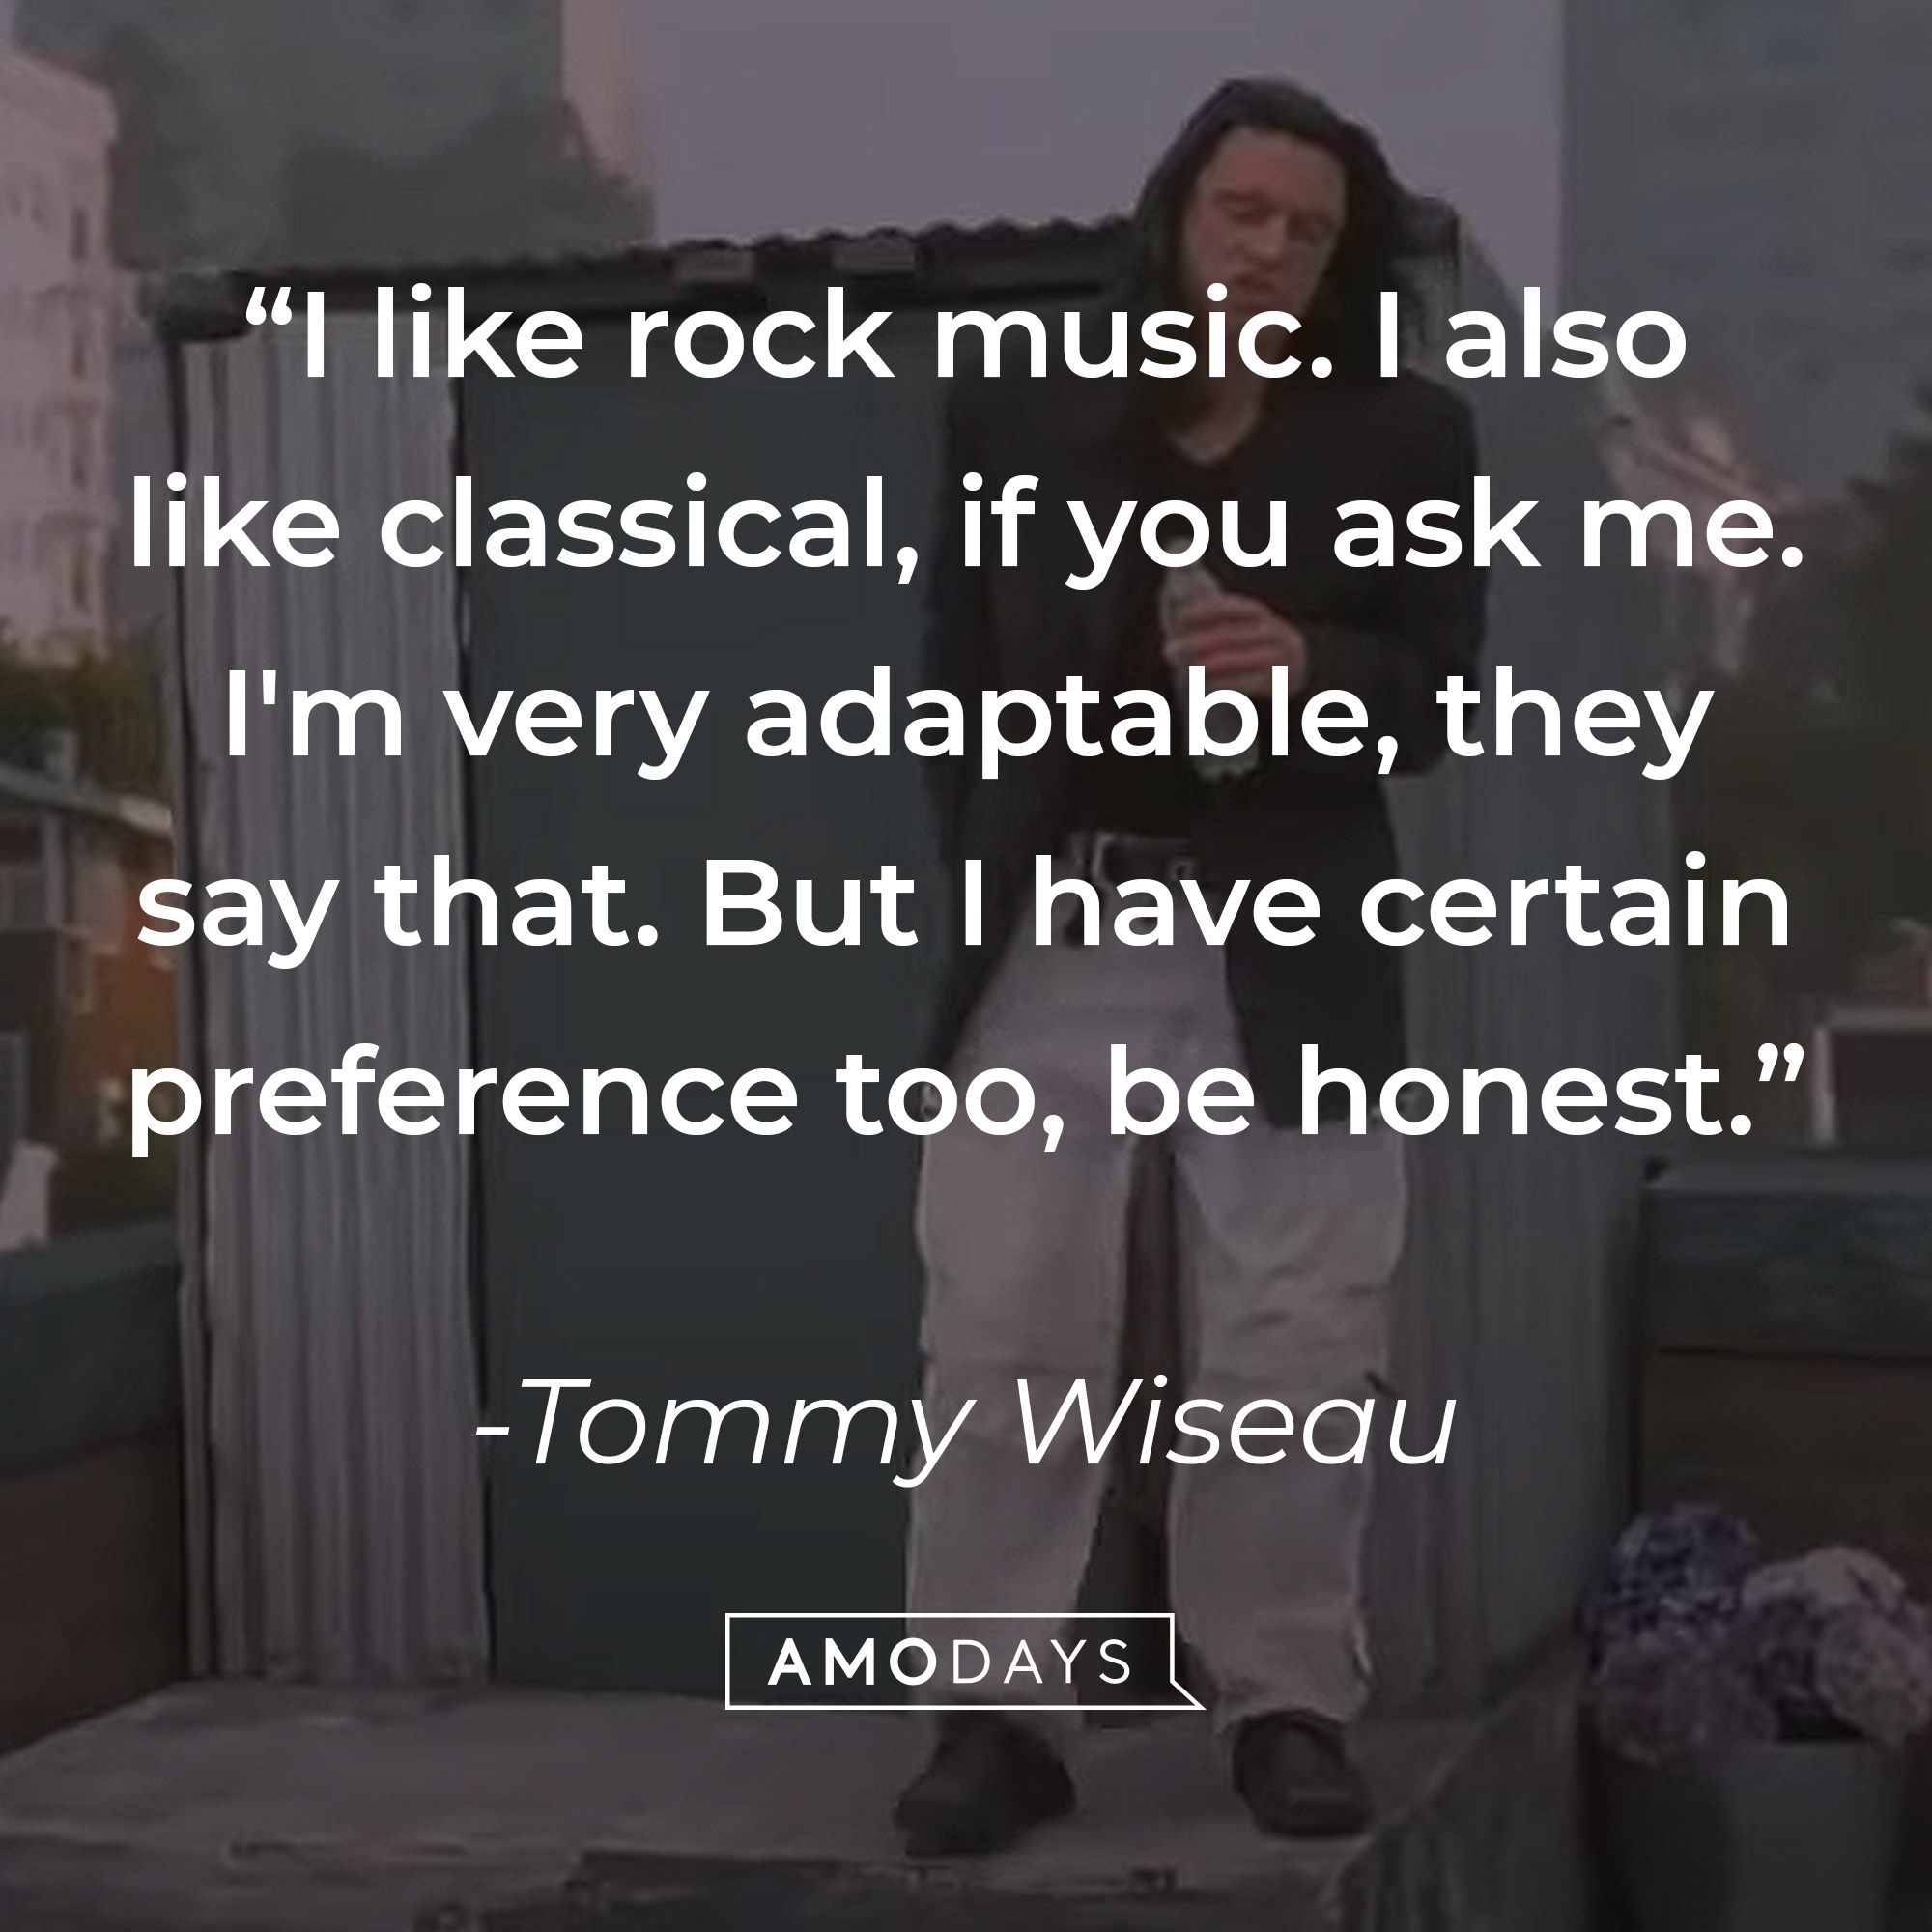 A photo of Tommy Wseau with the quote, ""I like rock music. I also like classical, if you ask me. I'm very adaptable, they say that. But I have certain preference too, be honest." | Source: YouTube/TommyWiseau